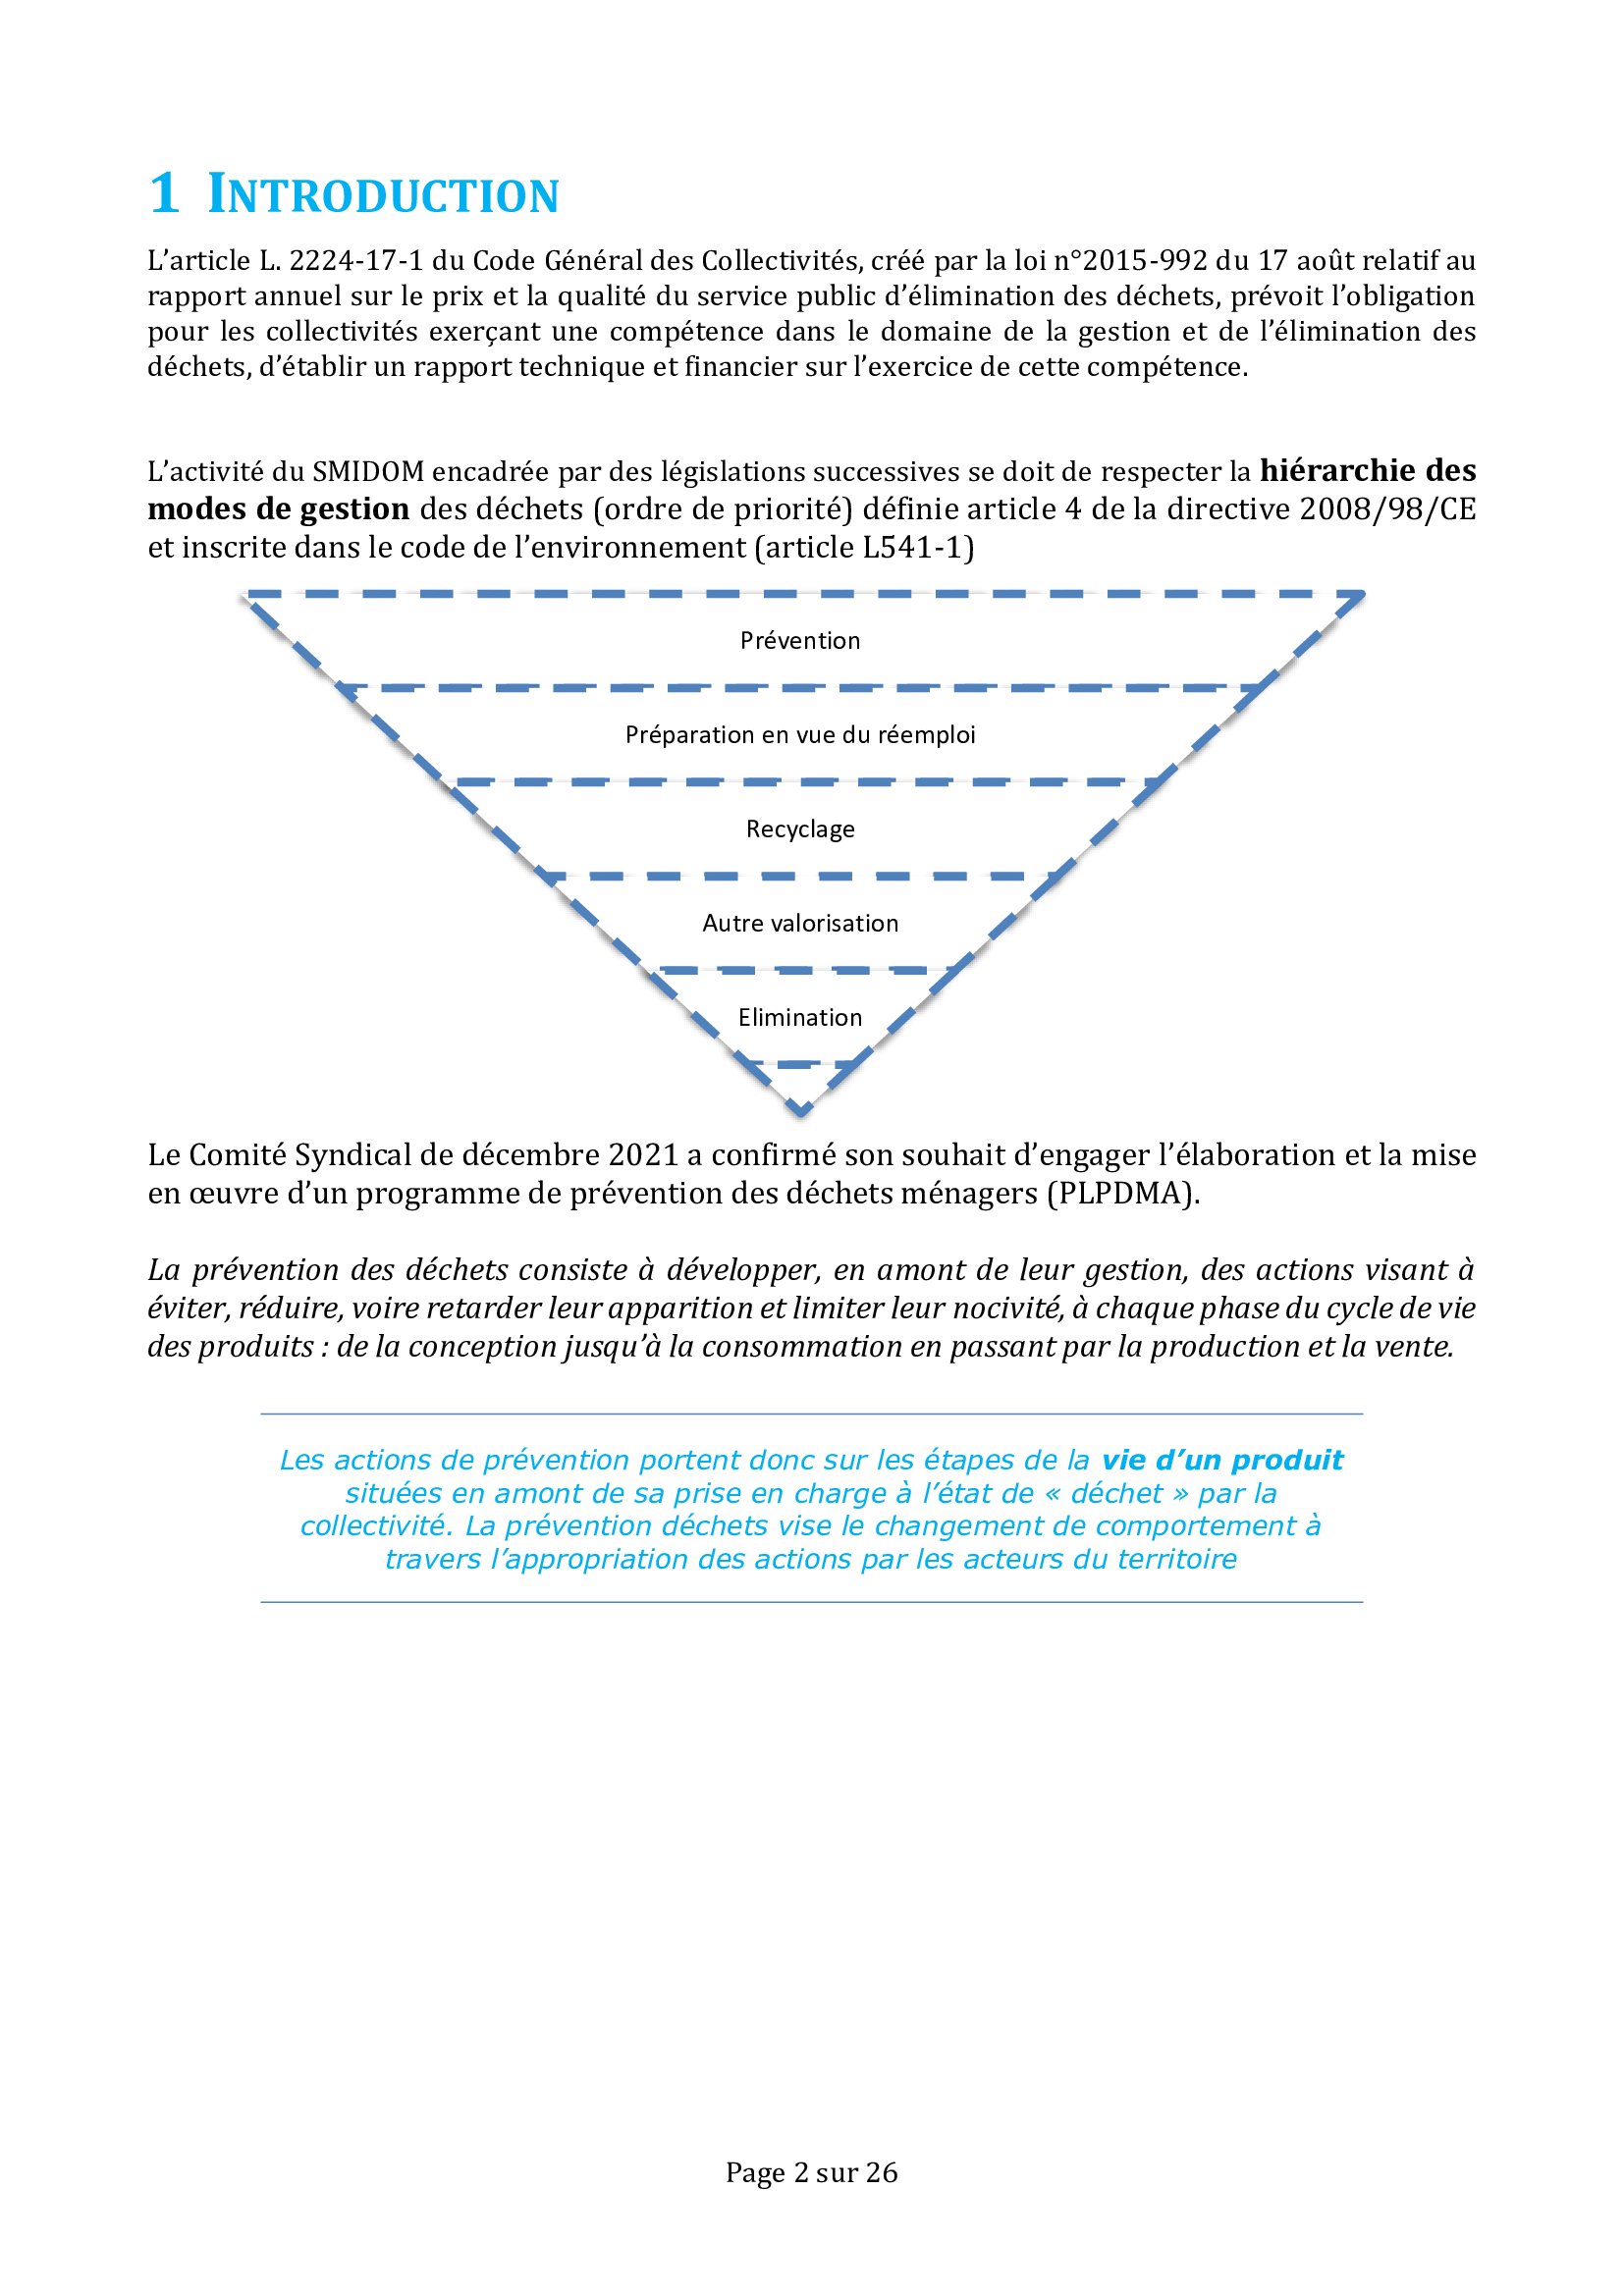 2021 - Rapport annuel - page 2.jpg